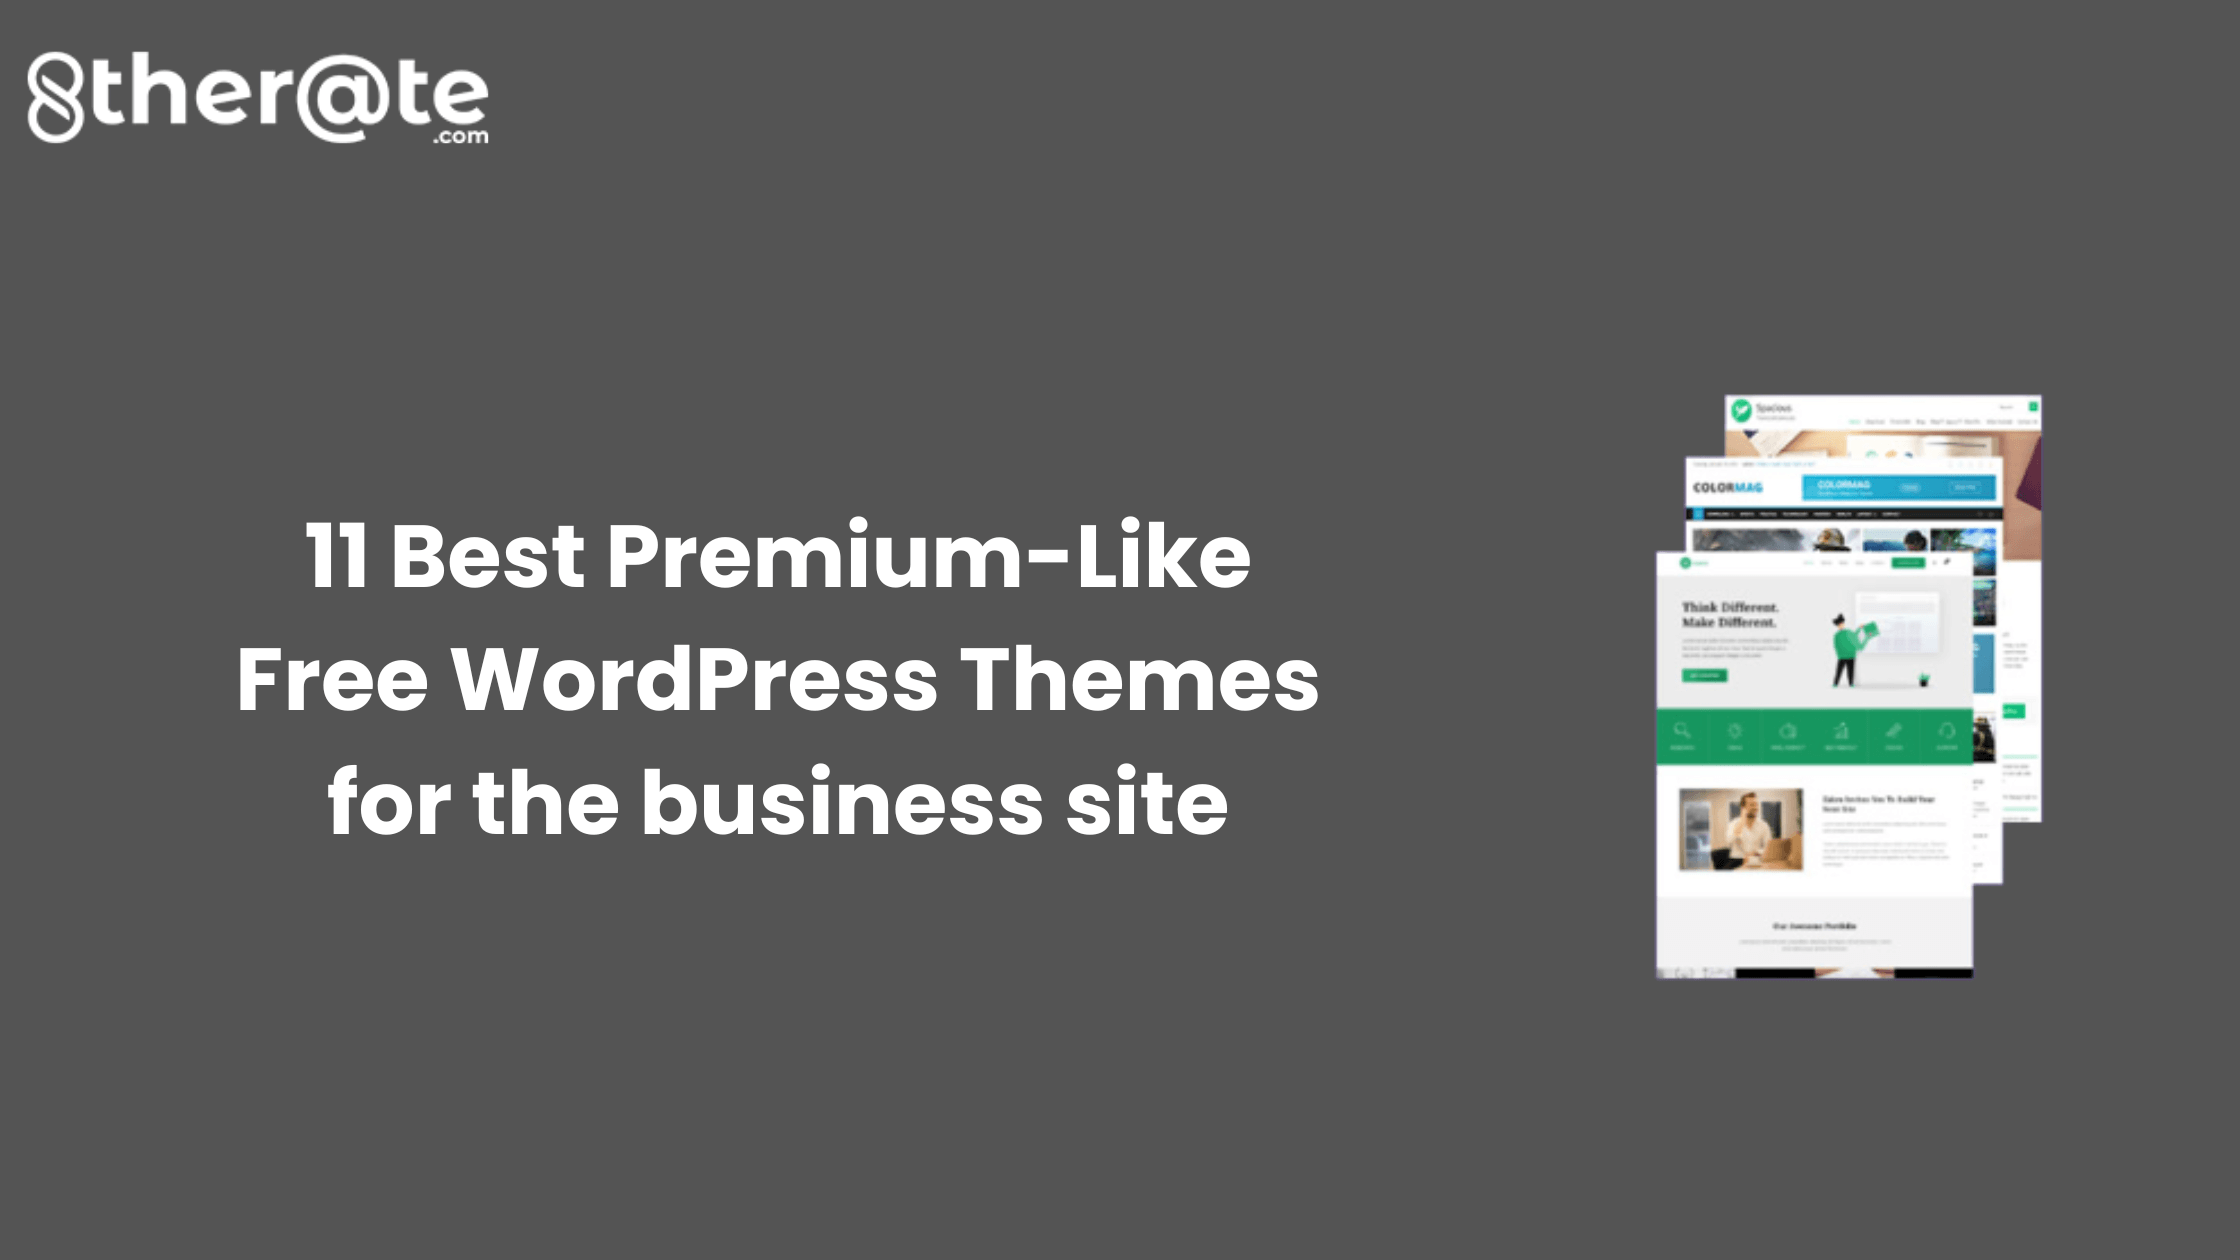 11 Best Premium-Like Free WordPress Themes for the Business Site